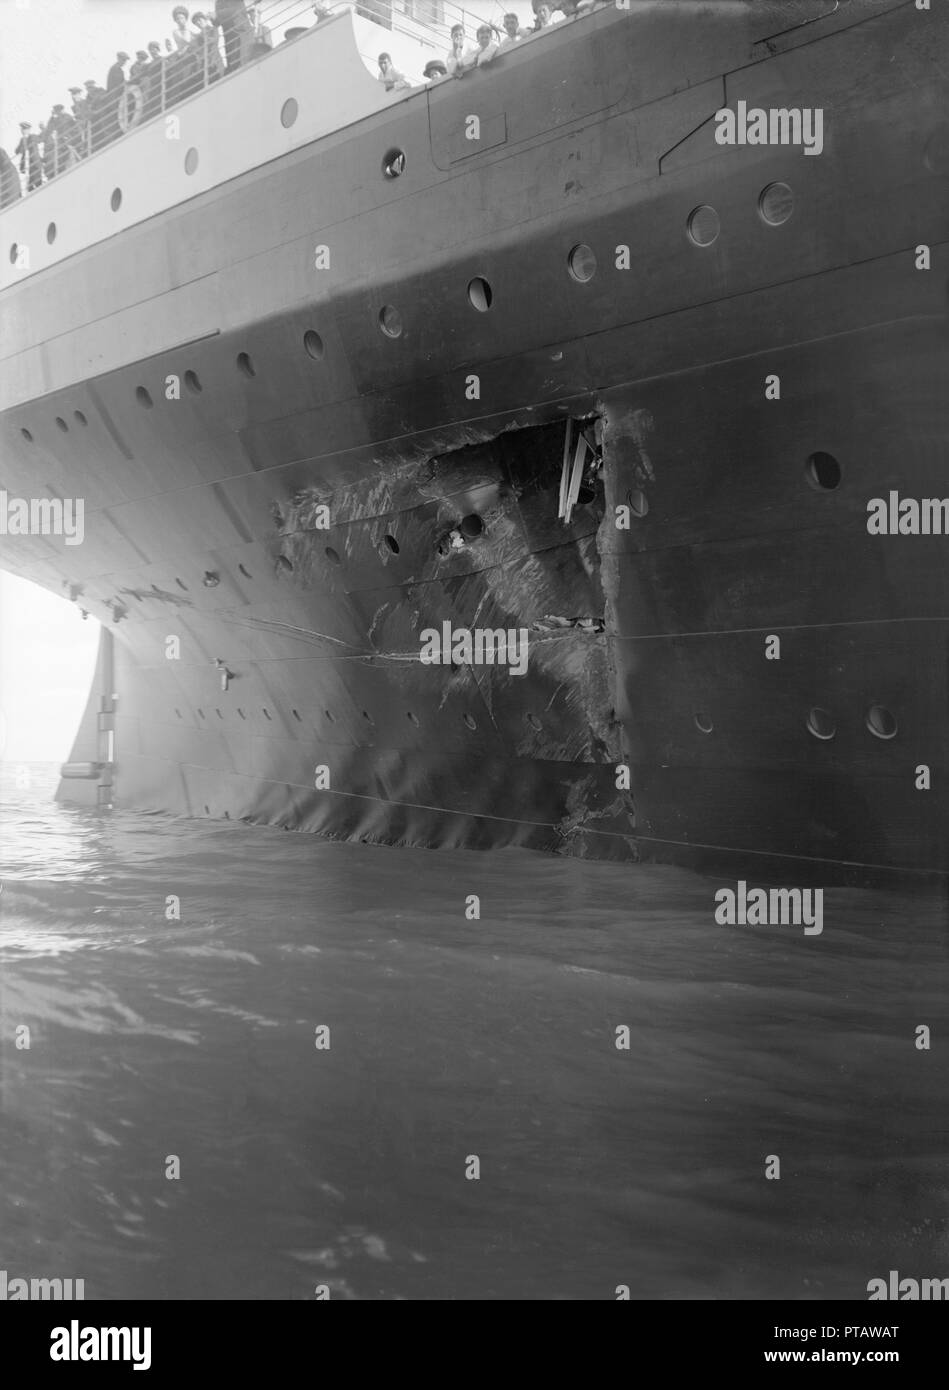 Rms Olympic Stock Photos Rms Olympic Stock Images Alamy